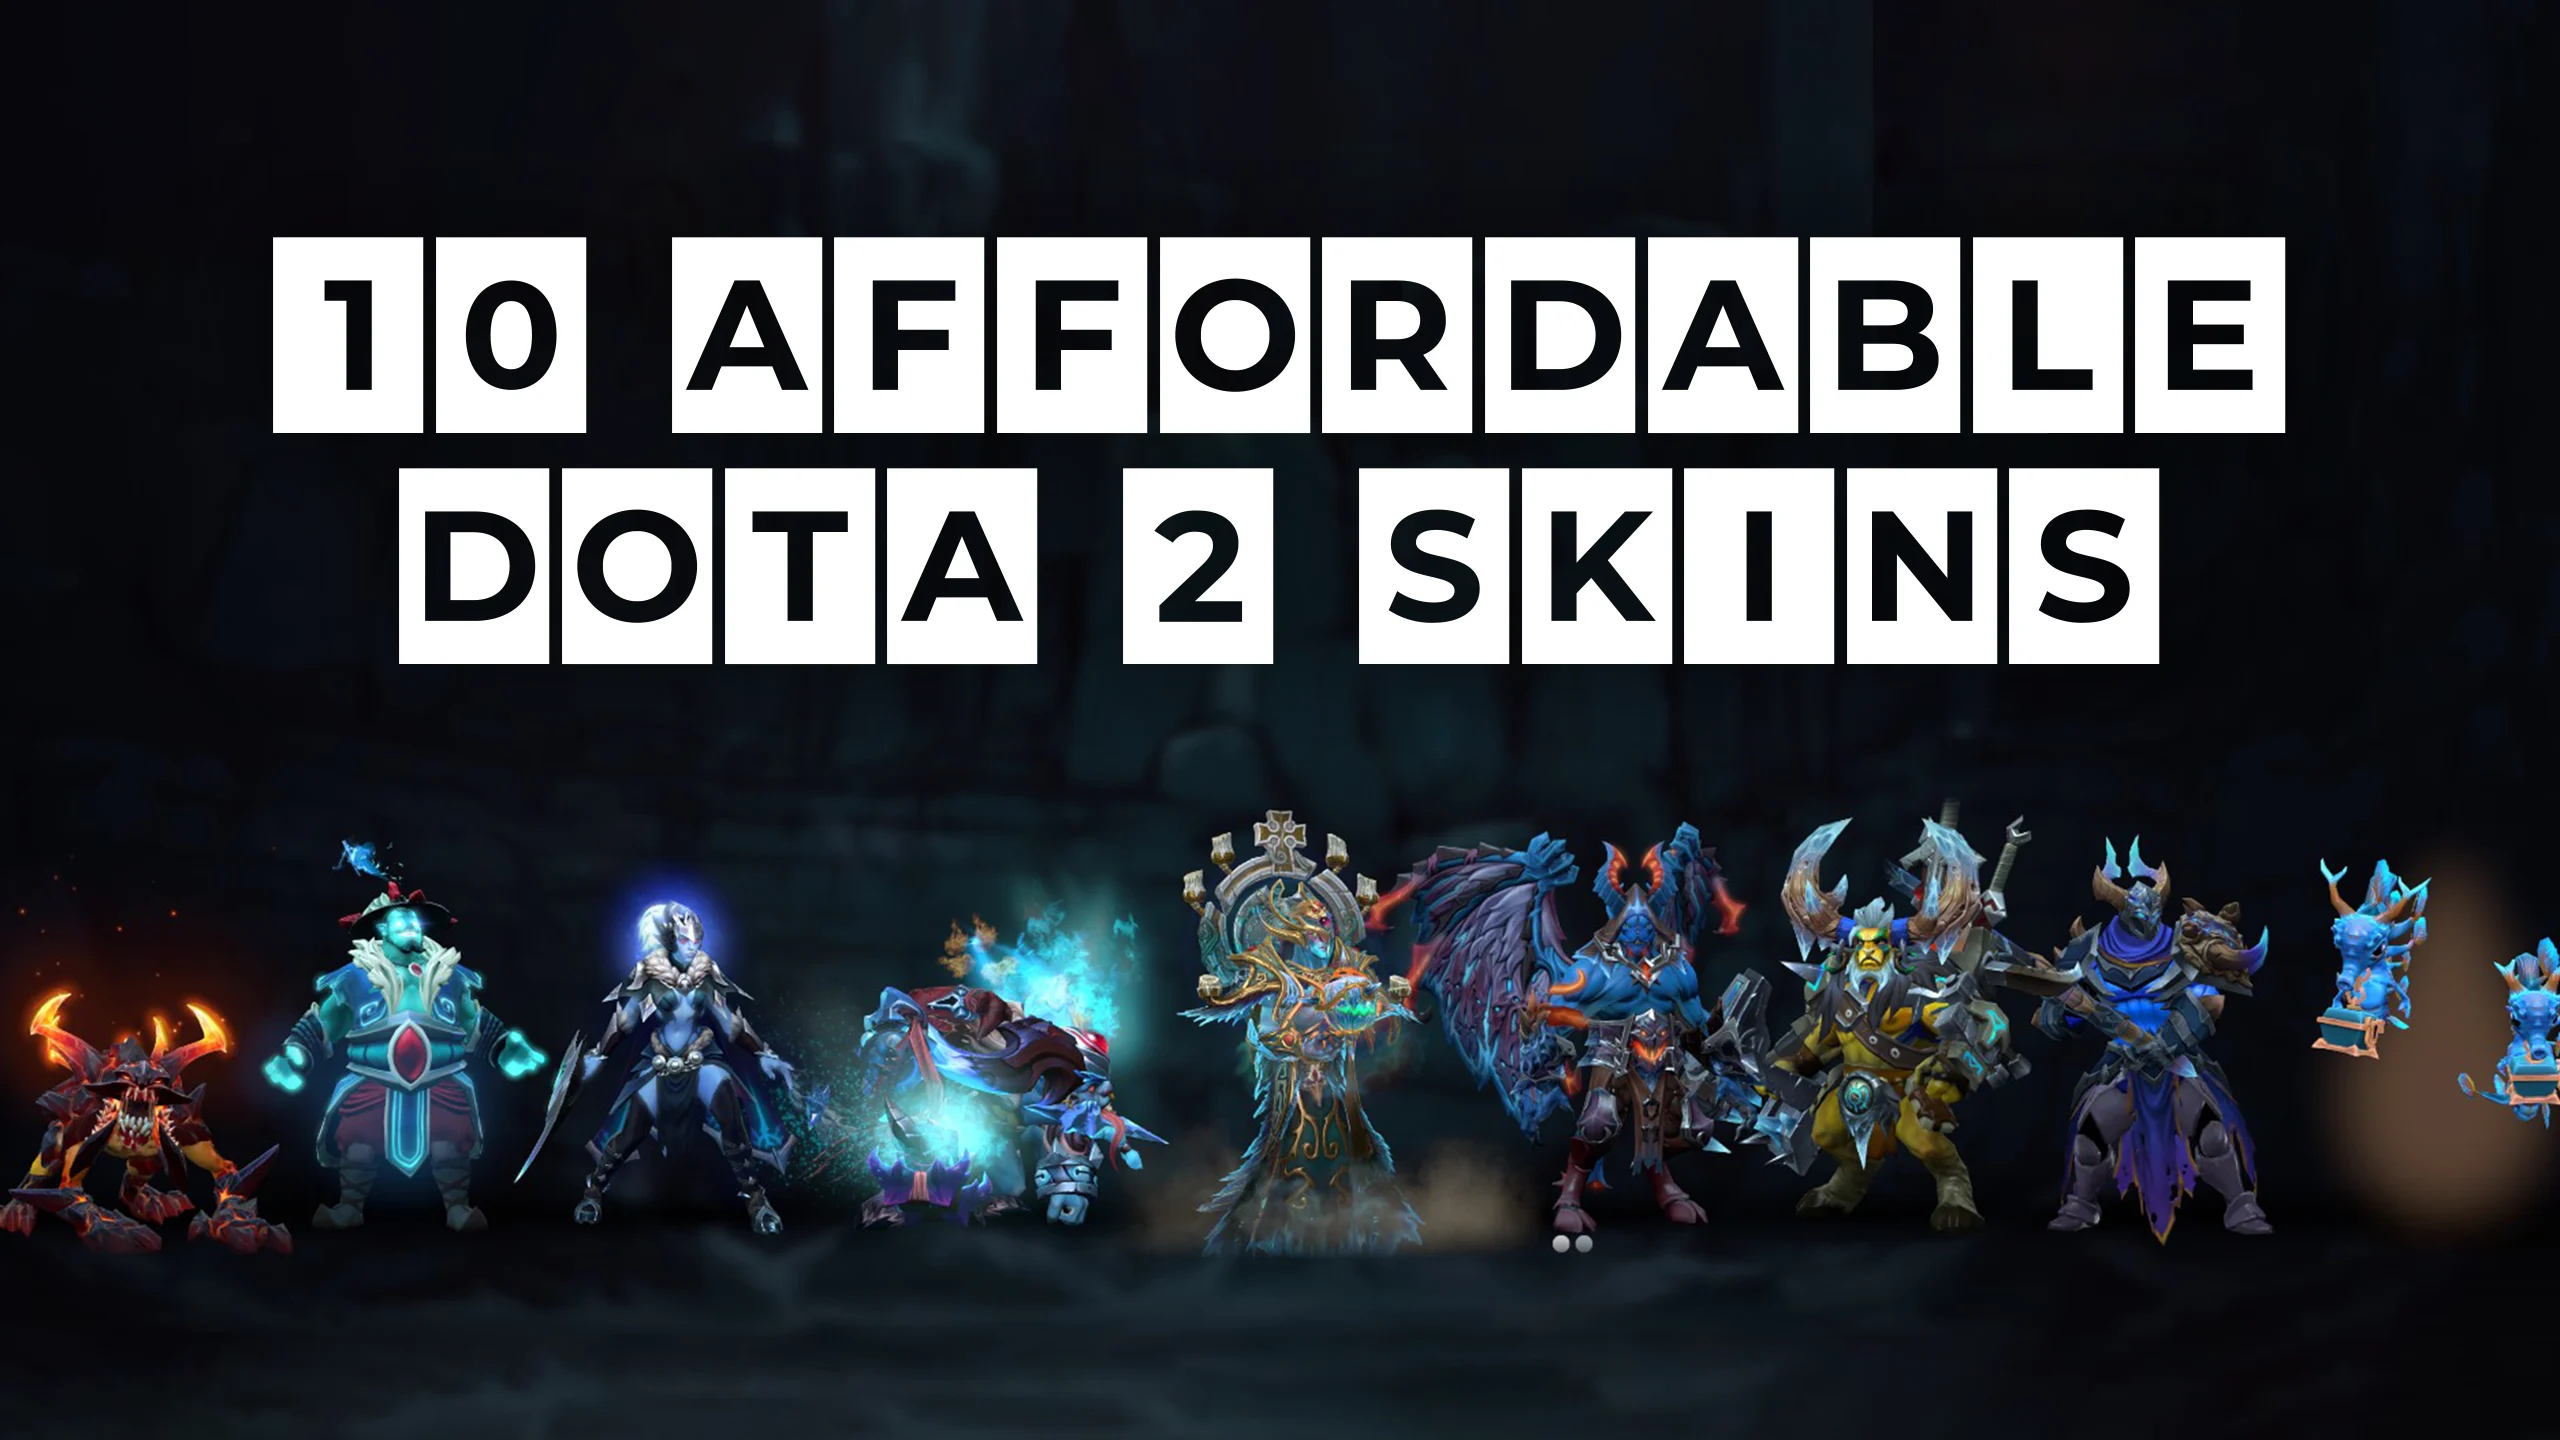 10 affordable Dota 2 skins with beautiful visual effects